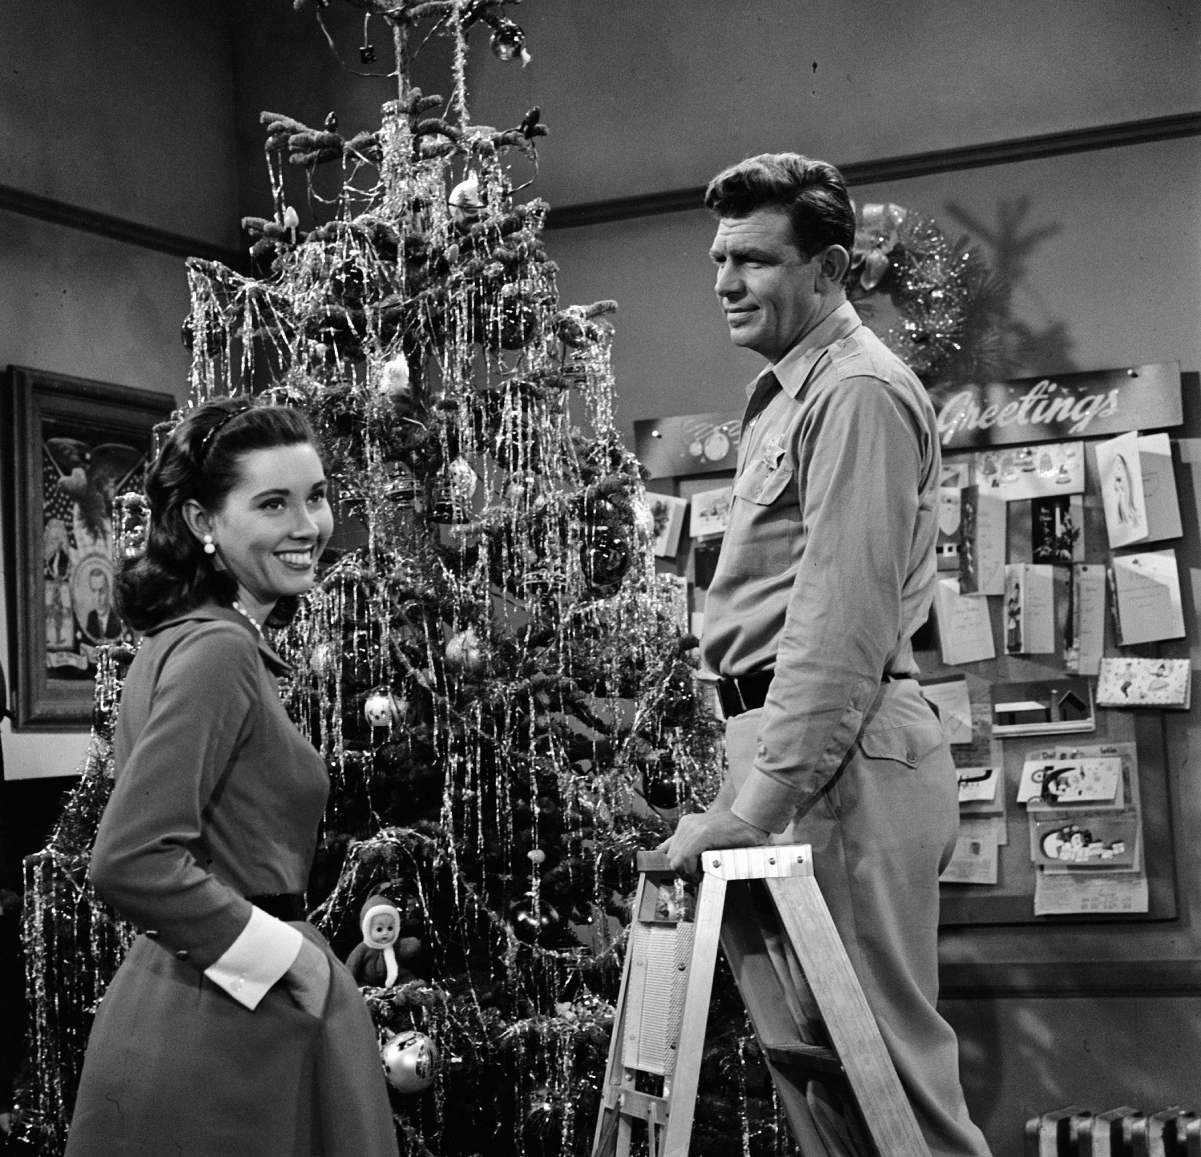 (L to R): Actor Elinor Donahue as Ellie Walker and Andy Griffith as Sheriff Andy Taylor decorate a Christmas tree in a scene from 'The Andy Griffith Show'